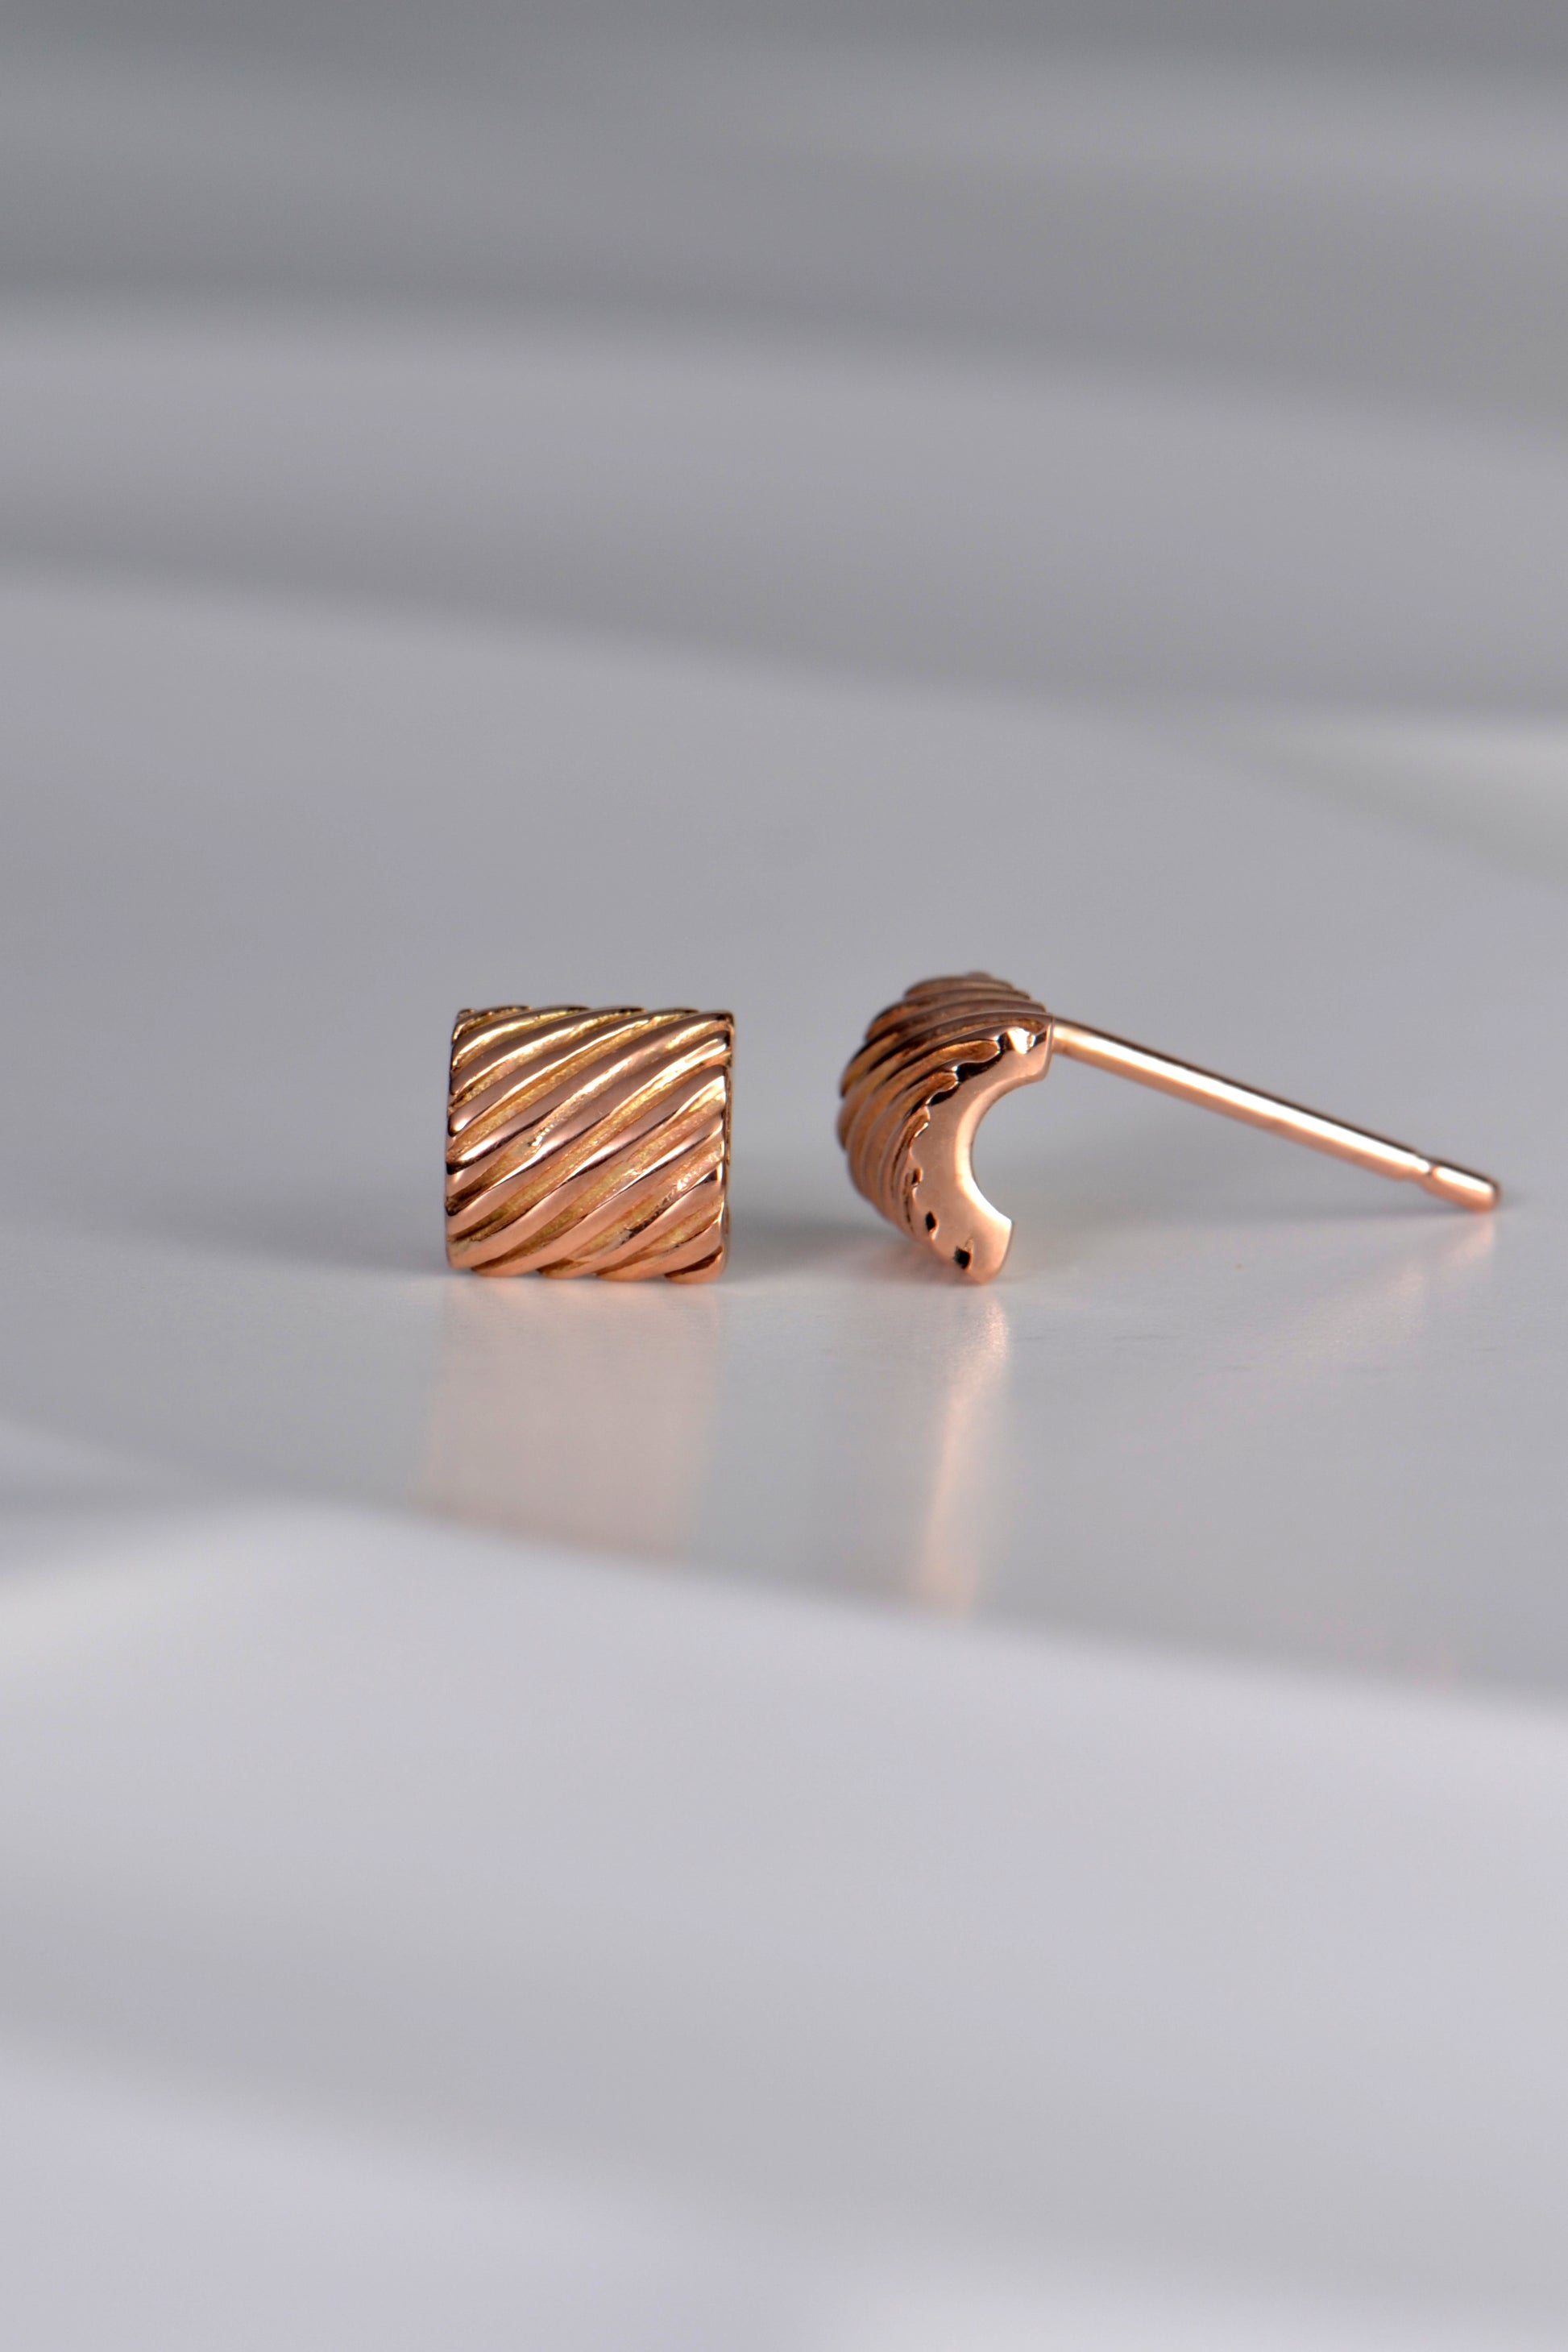 modern reectangular small rose gold stud earring. The rectangular shape curves and the earring posts sits at the top of the stud.